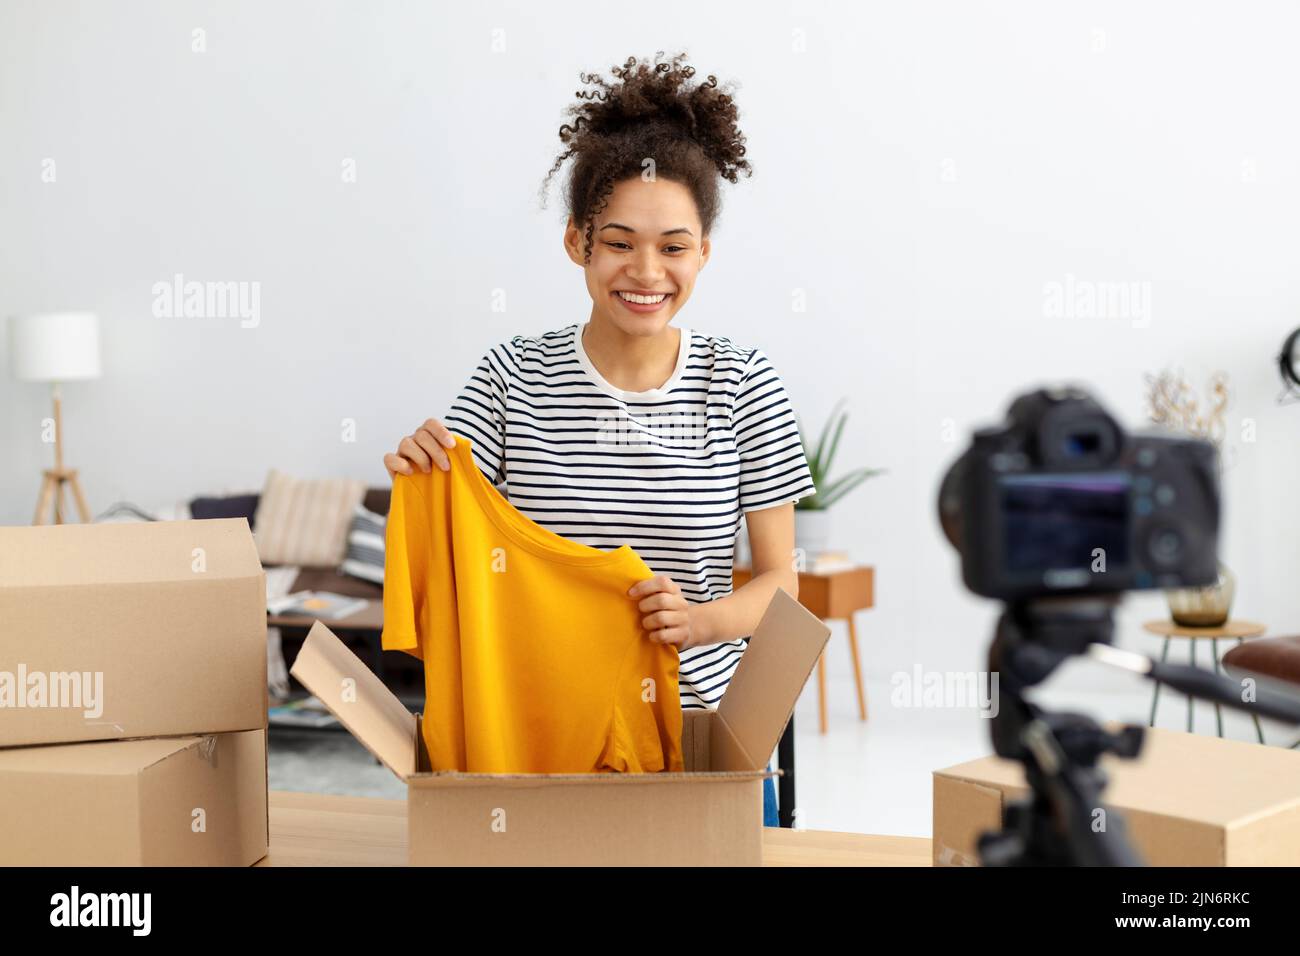 female vlogger freelancer using camera to recording video content makes Stock Photo